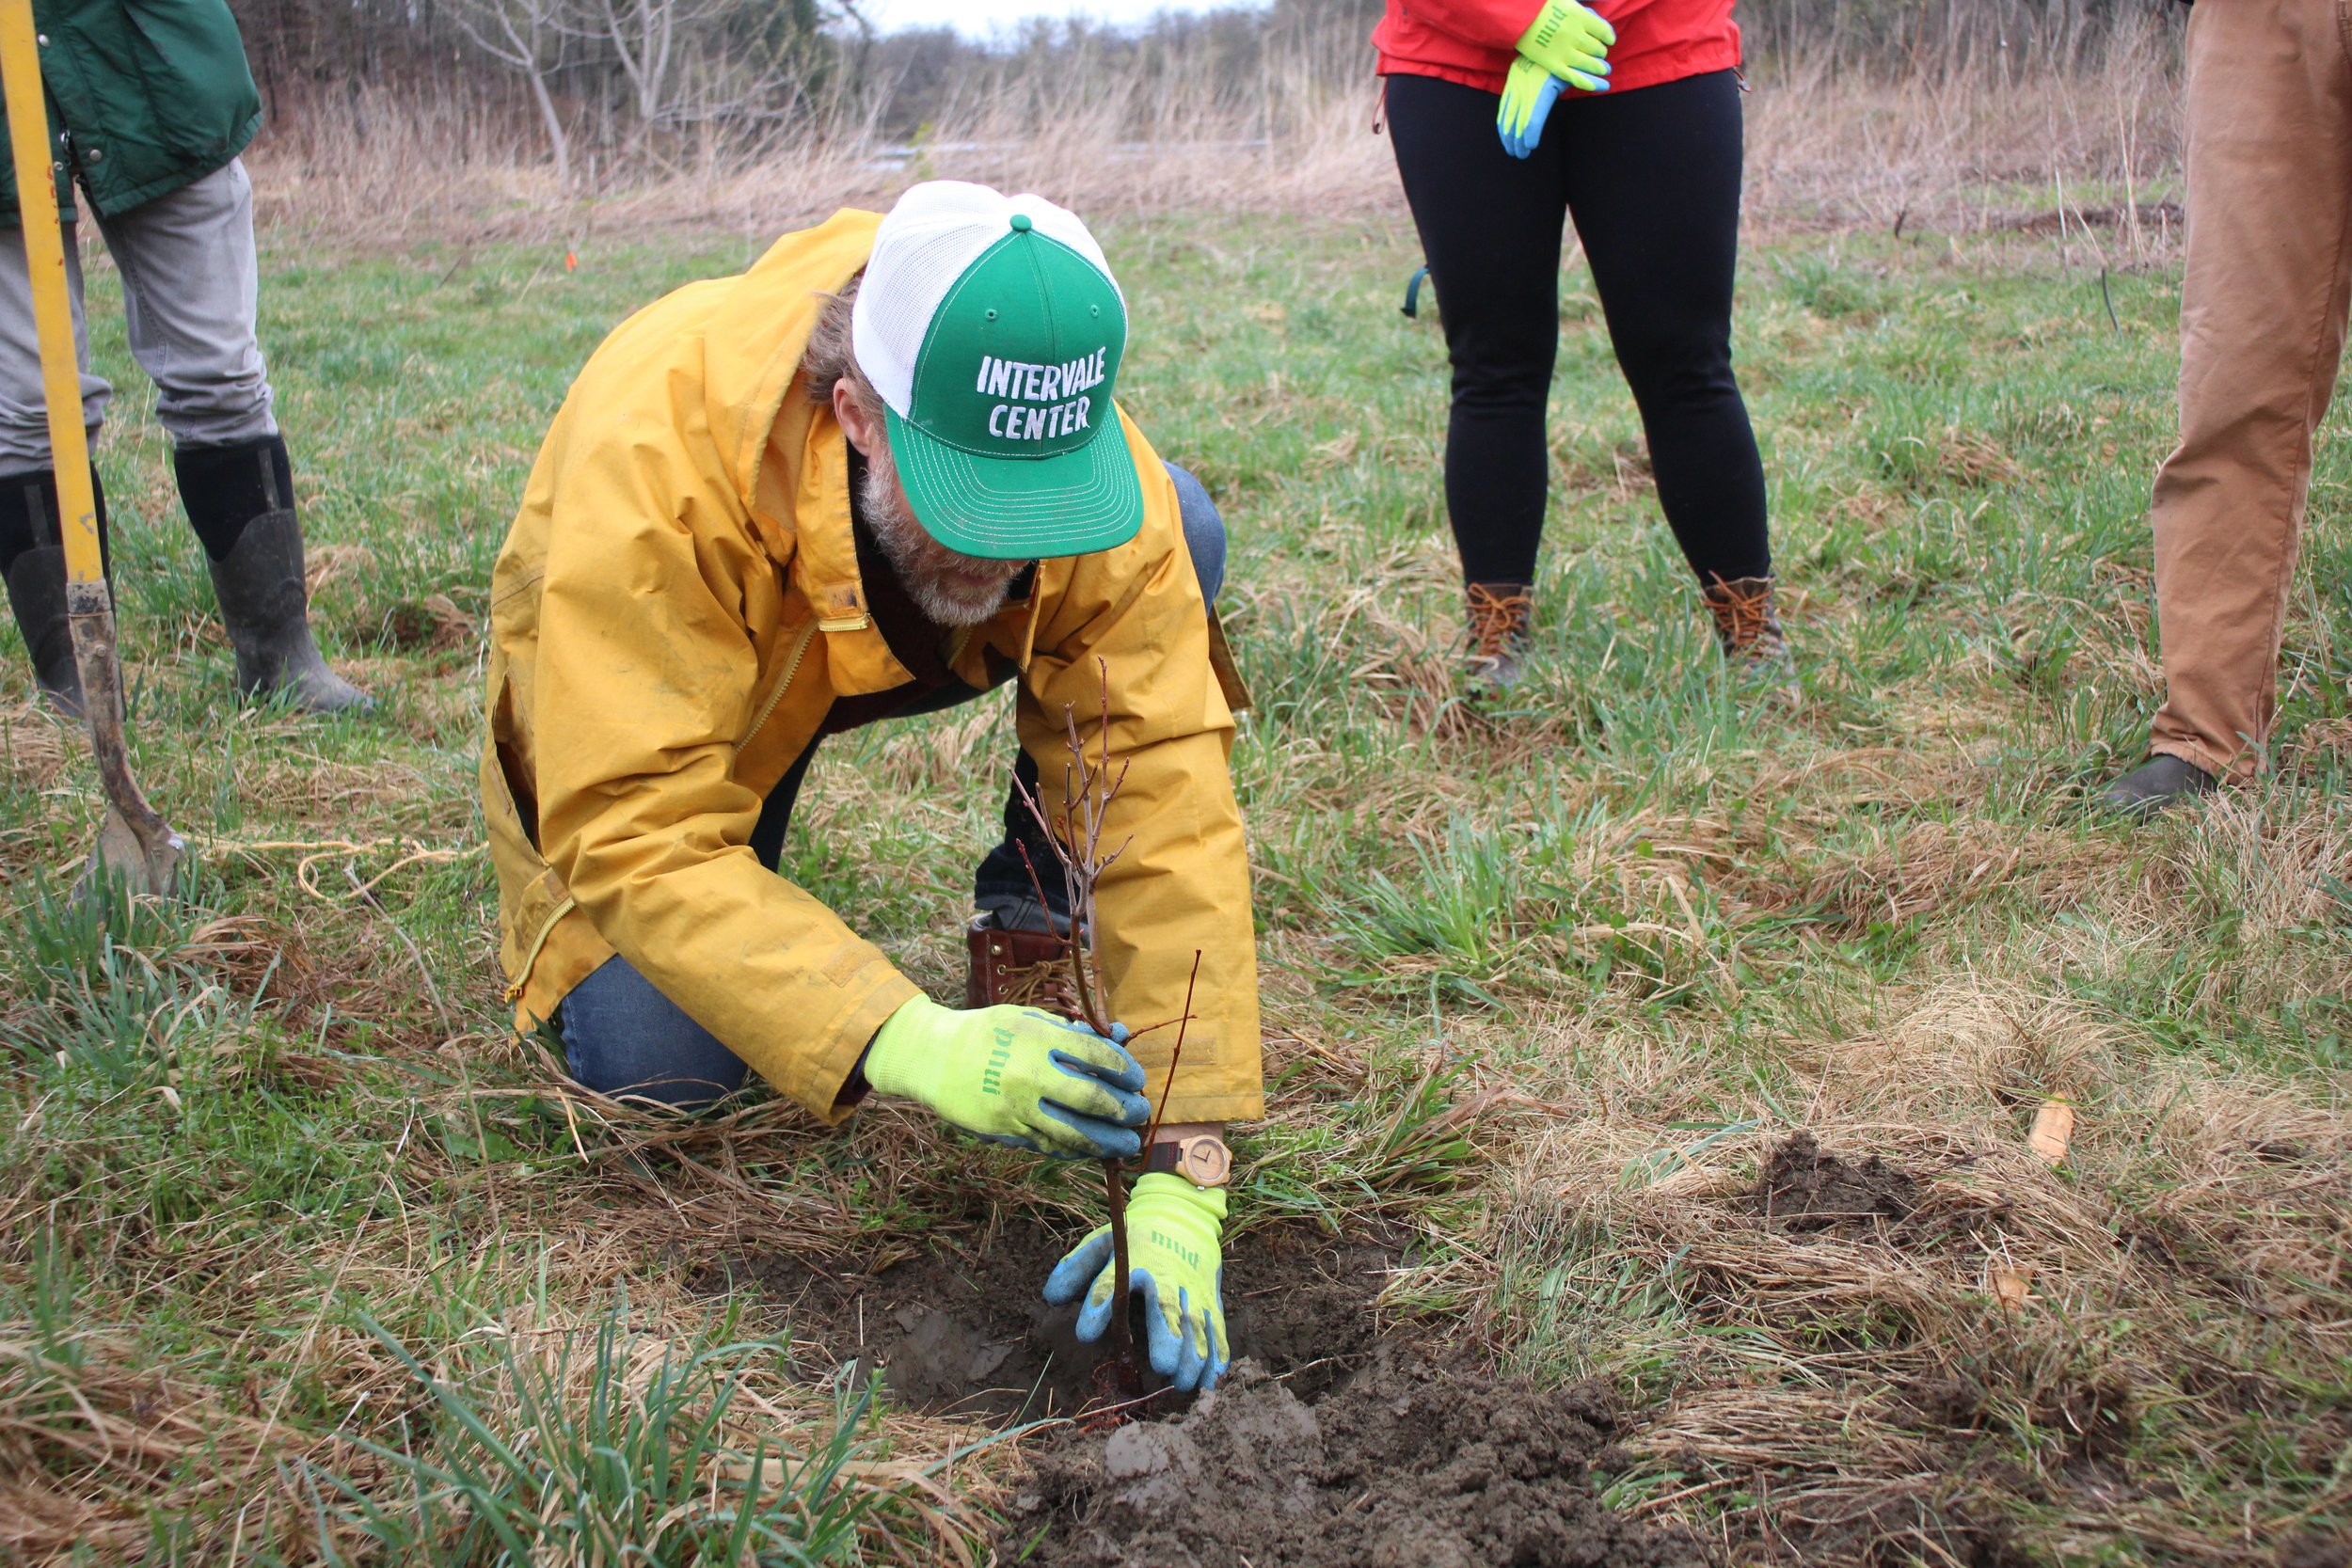 Tree planting kicks off local Earth Month activities (Copy)